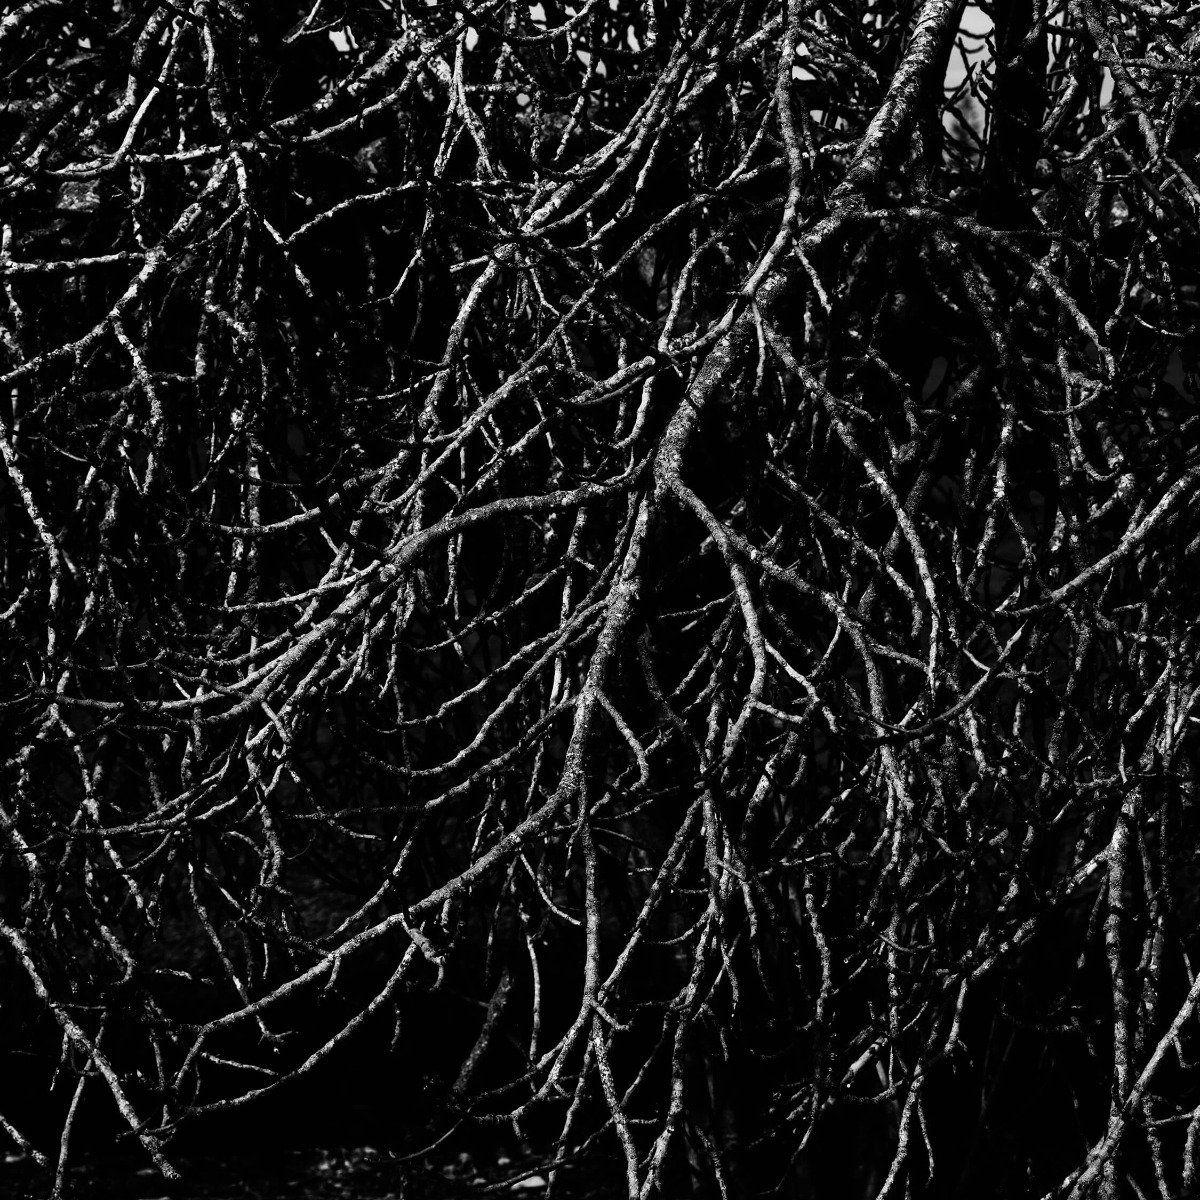 Tree branches in black and white